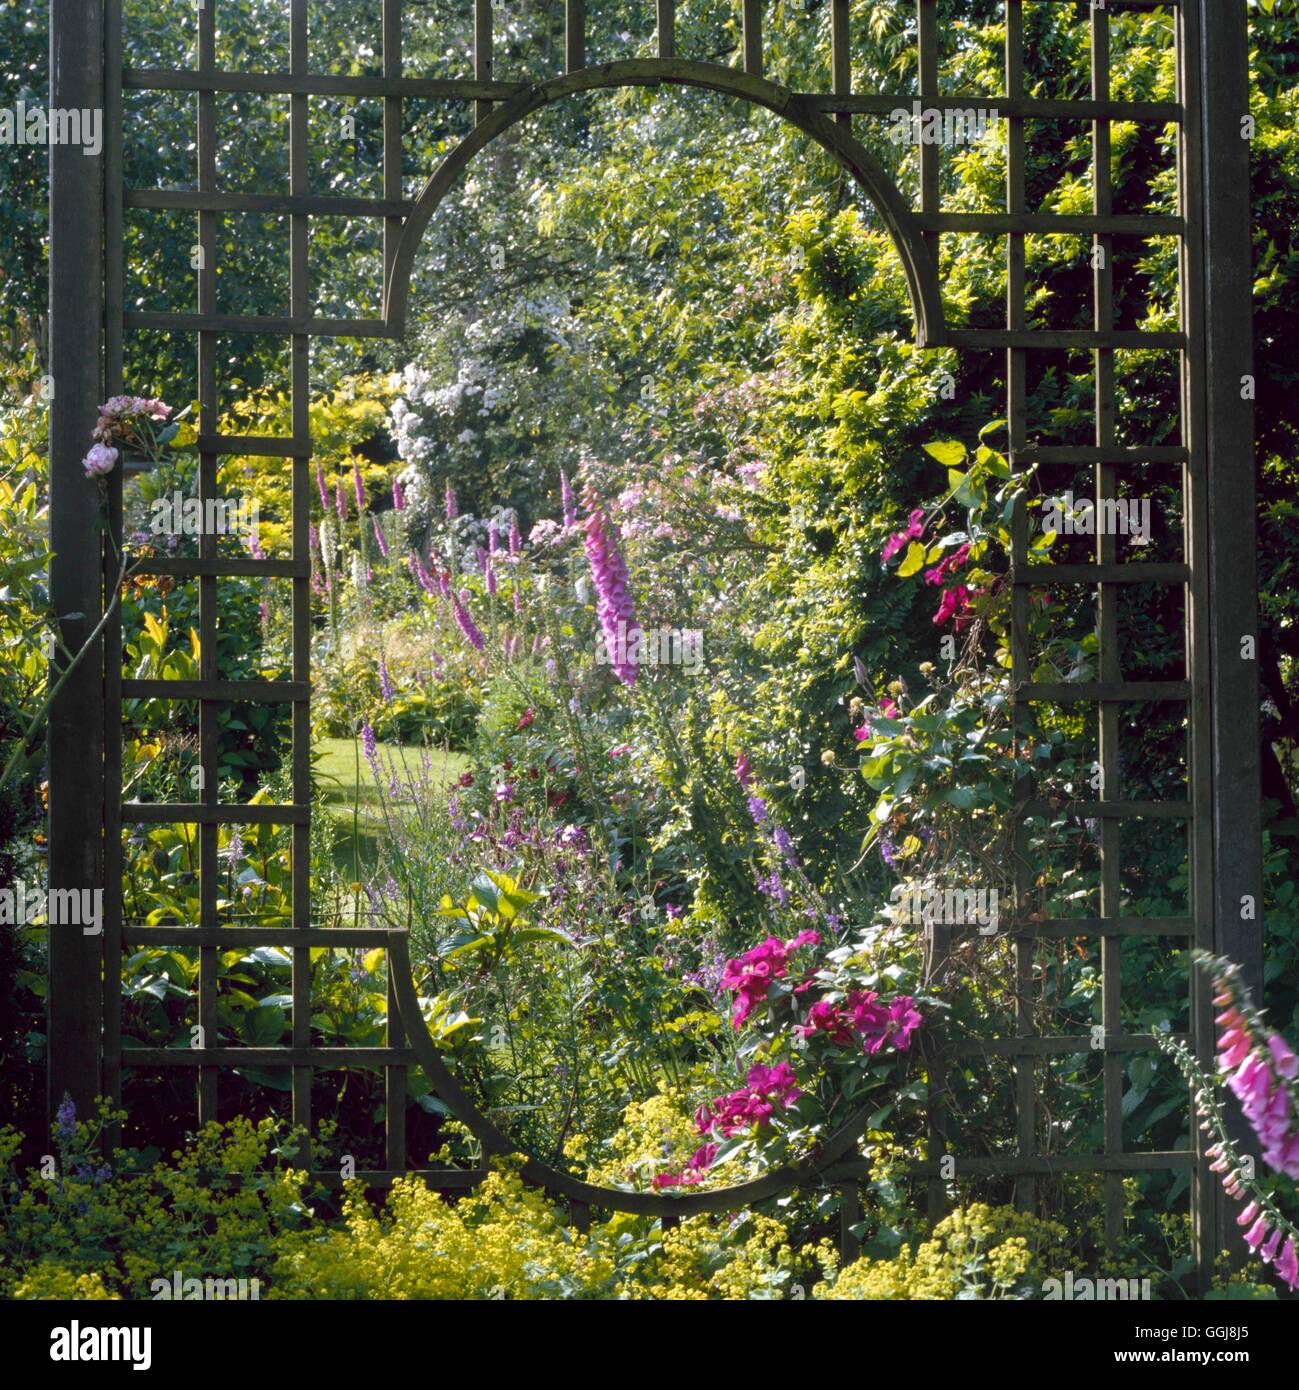 Fence - of ornamental trellis framing the view (Please credit: Photos Horticultural/ Le Jardin de Valerianes  France)   Ref: PHS Stock Photo